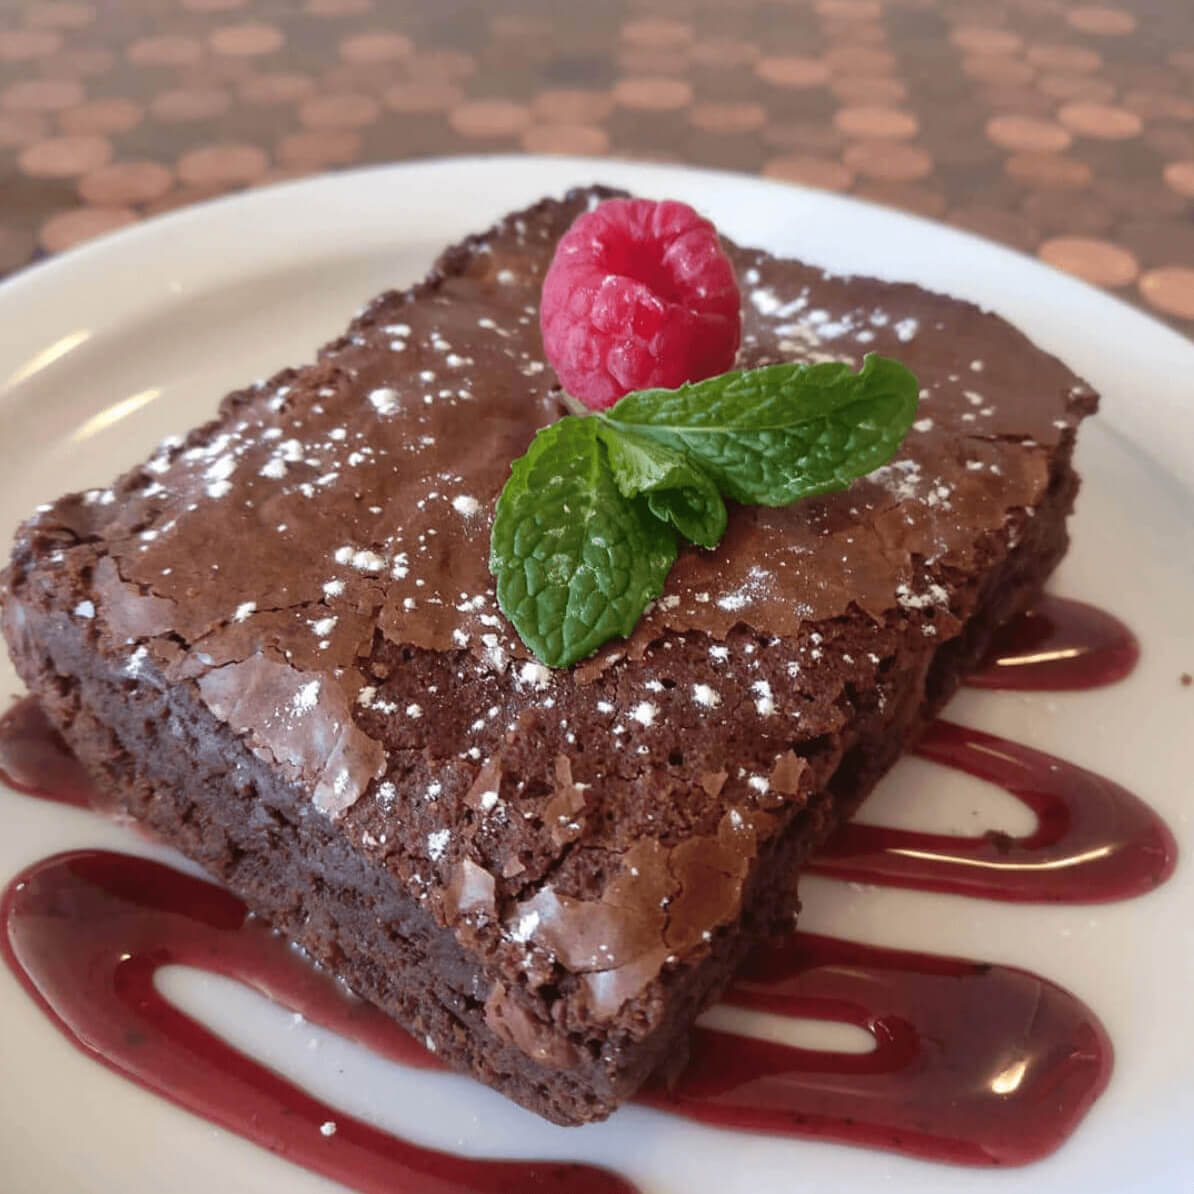 chocolate brownie with a raspberry on it